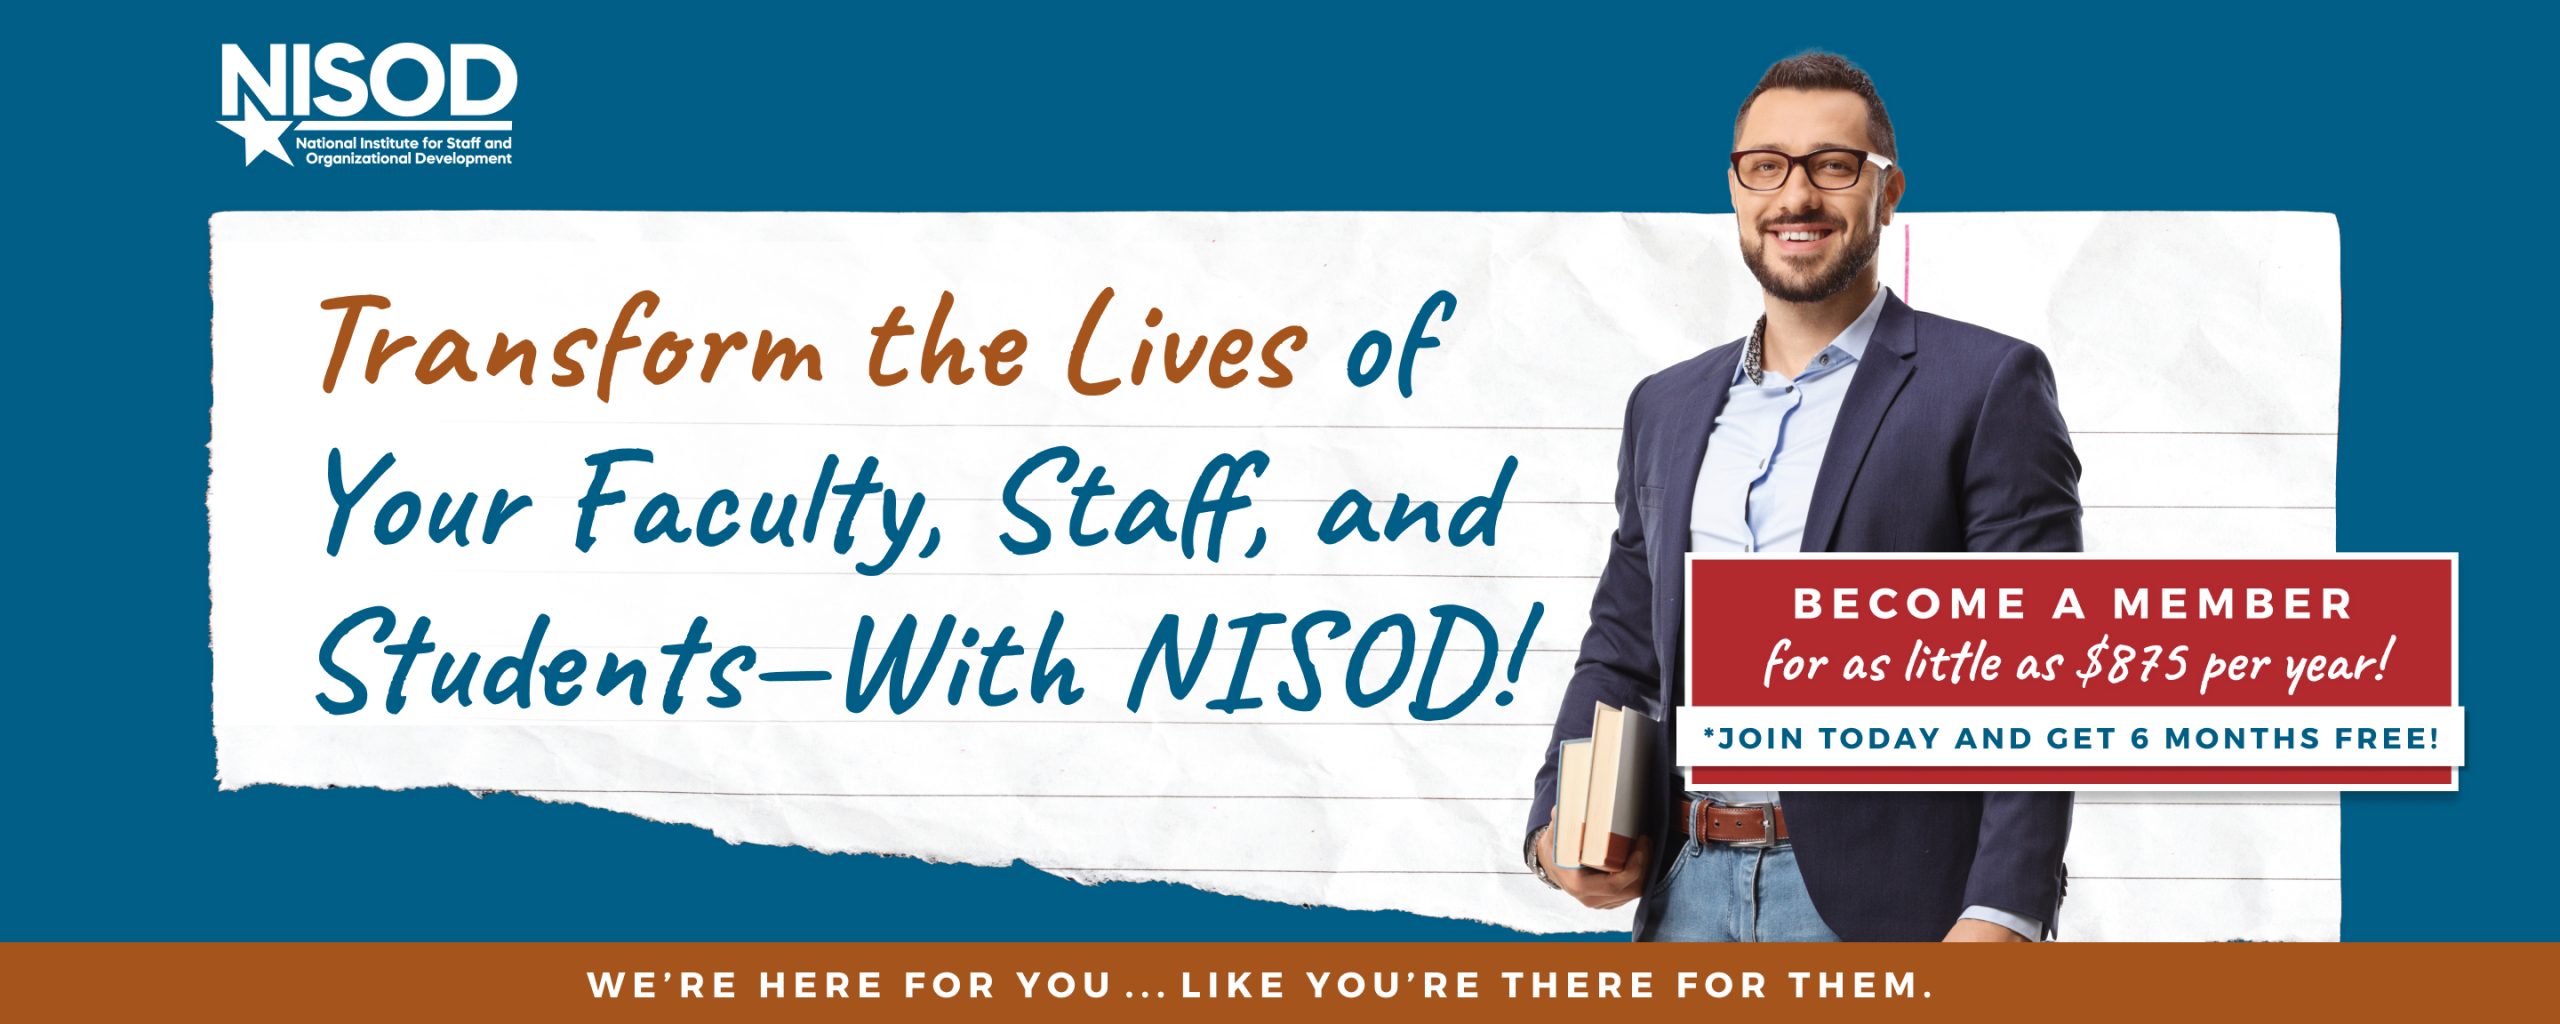 Top banner image with the NISOD membership campaign tagline.